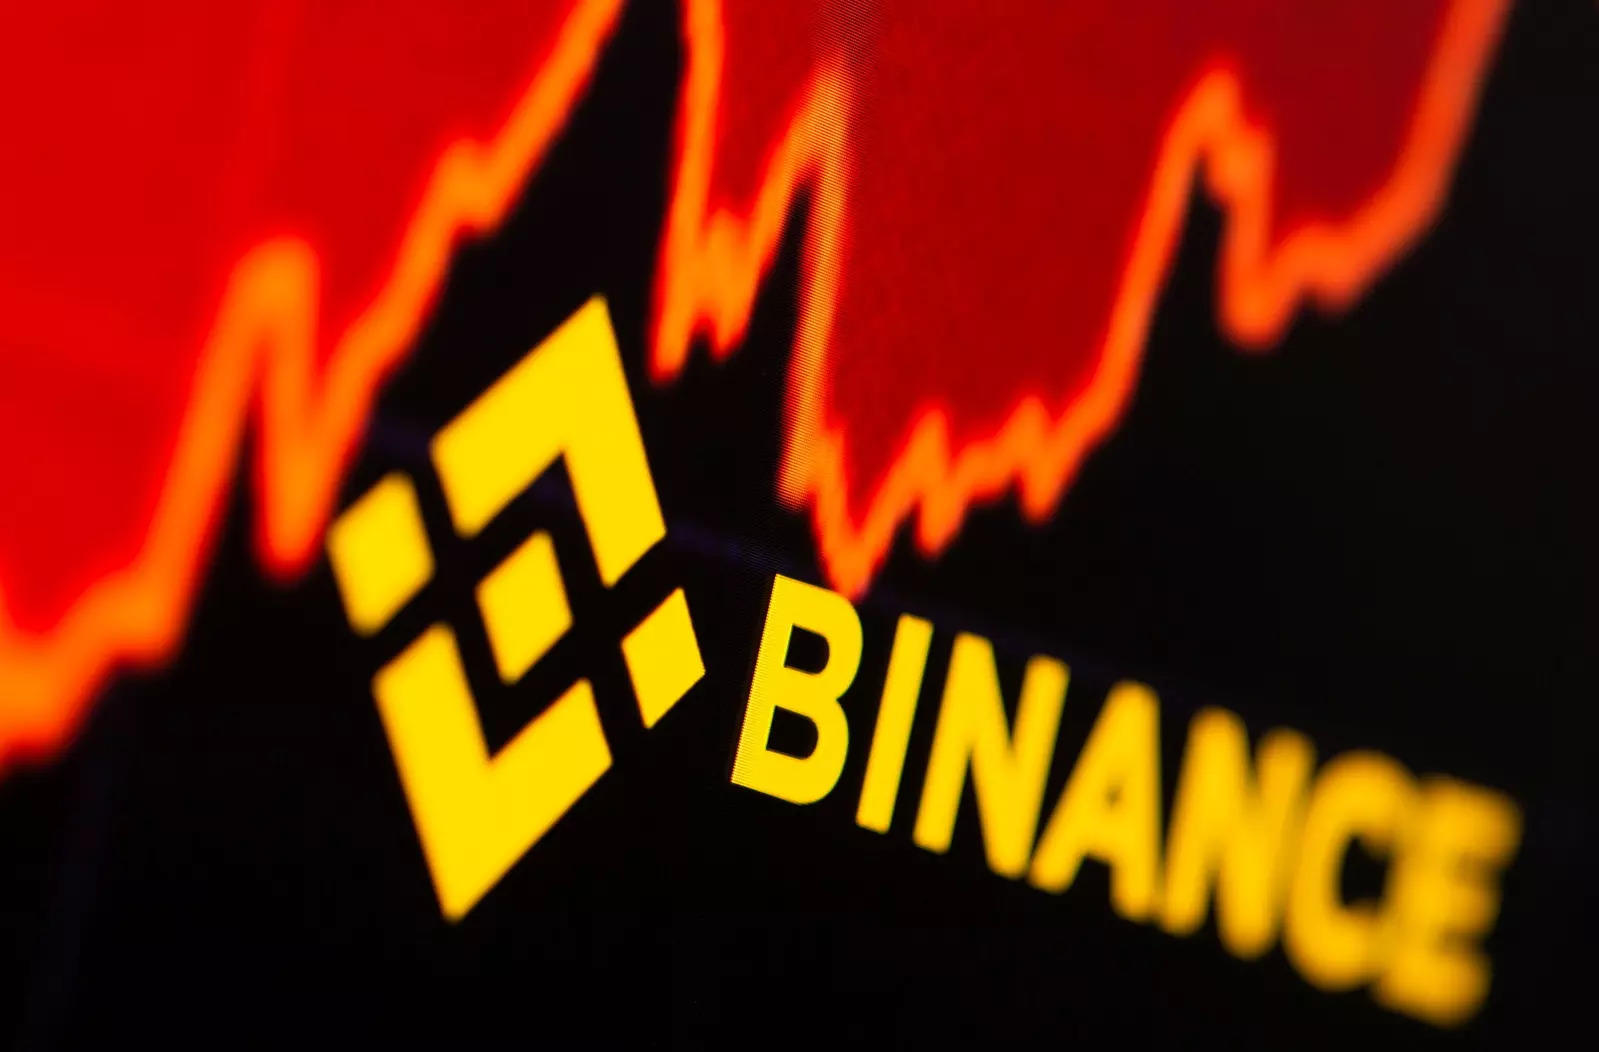 FILE PHOTO: Binance logo and stock graph are displayed in this illustration taken